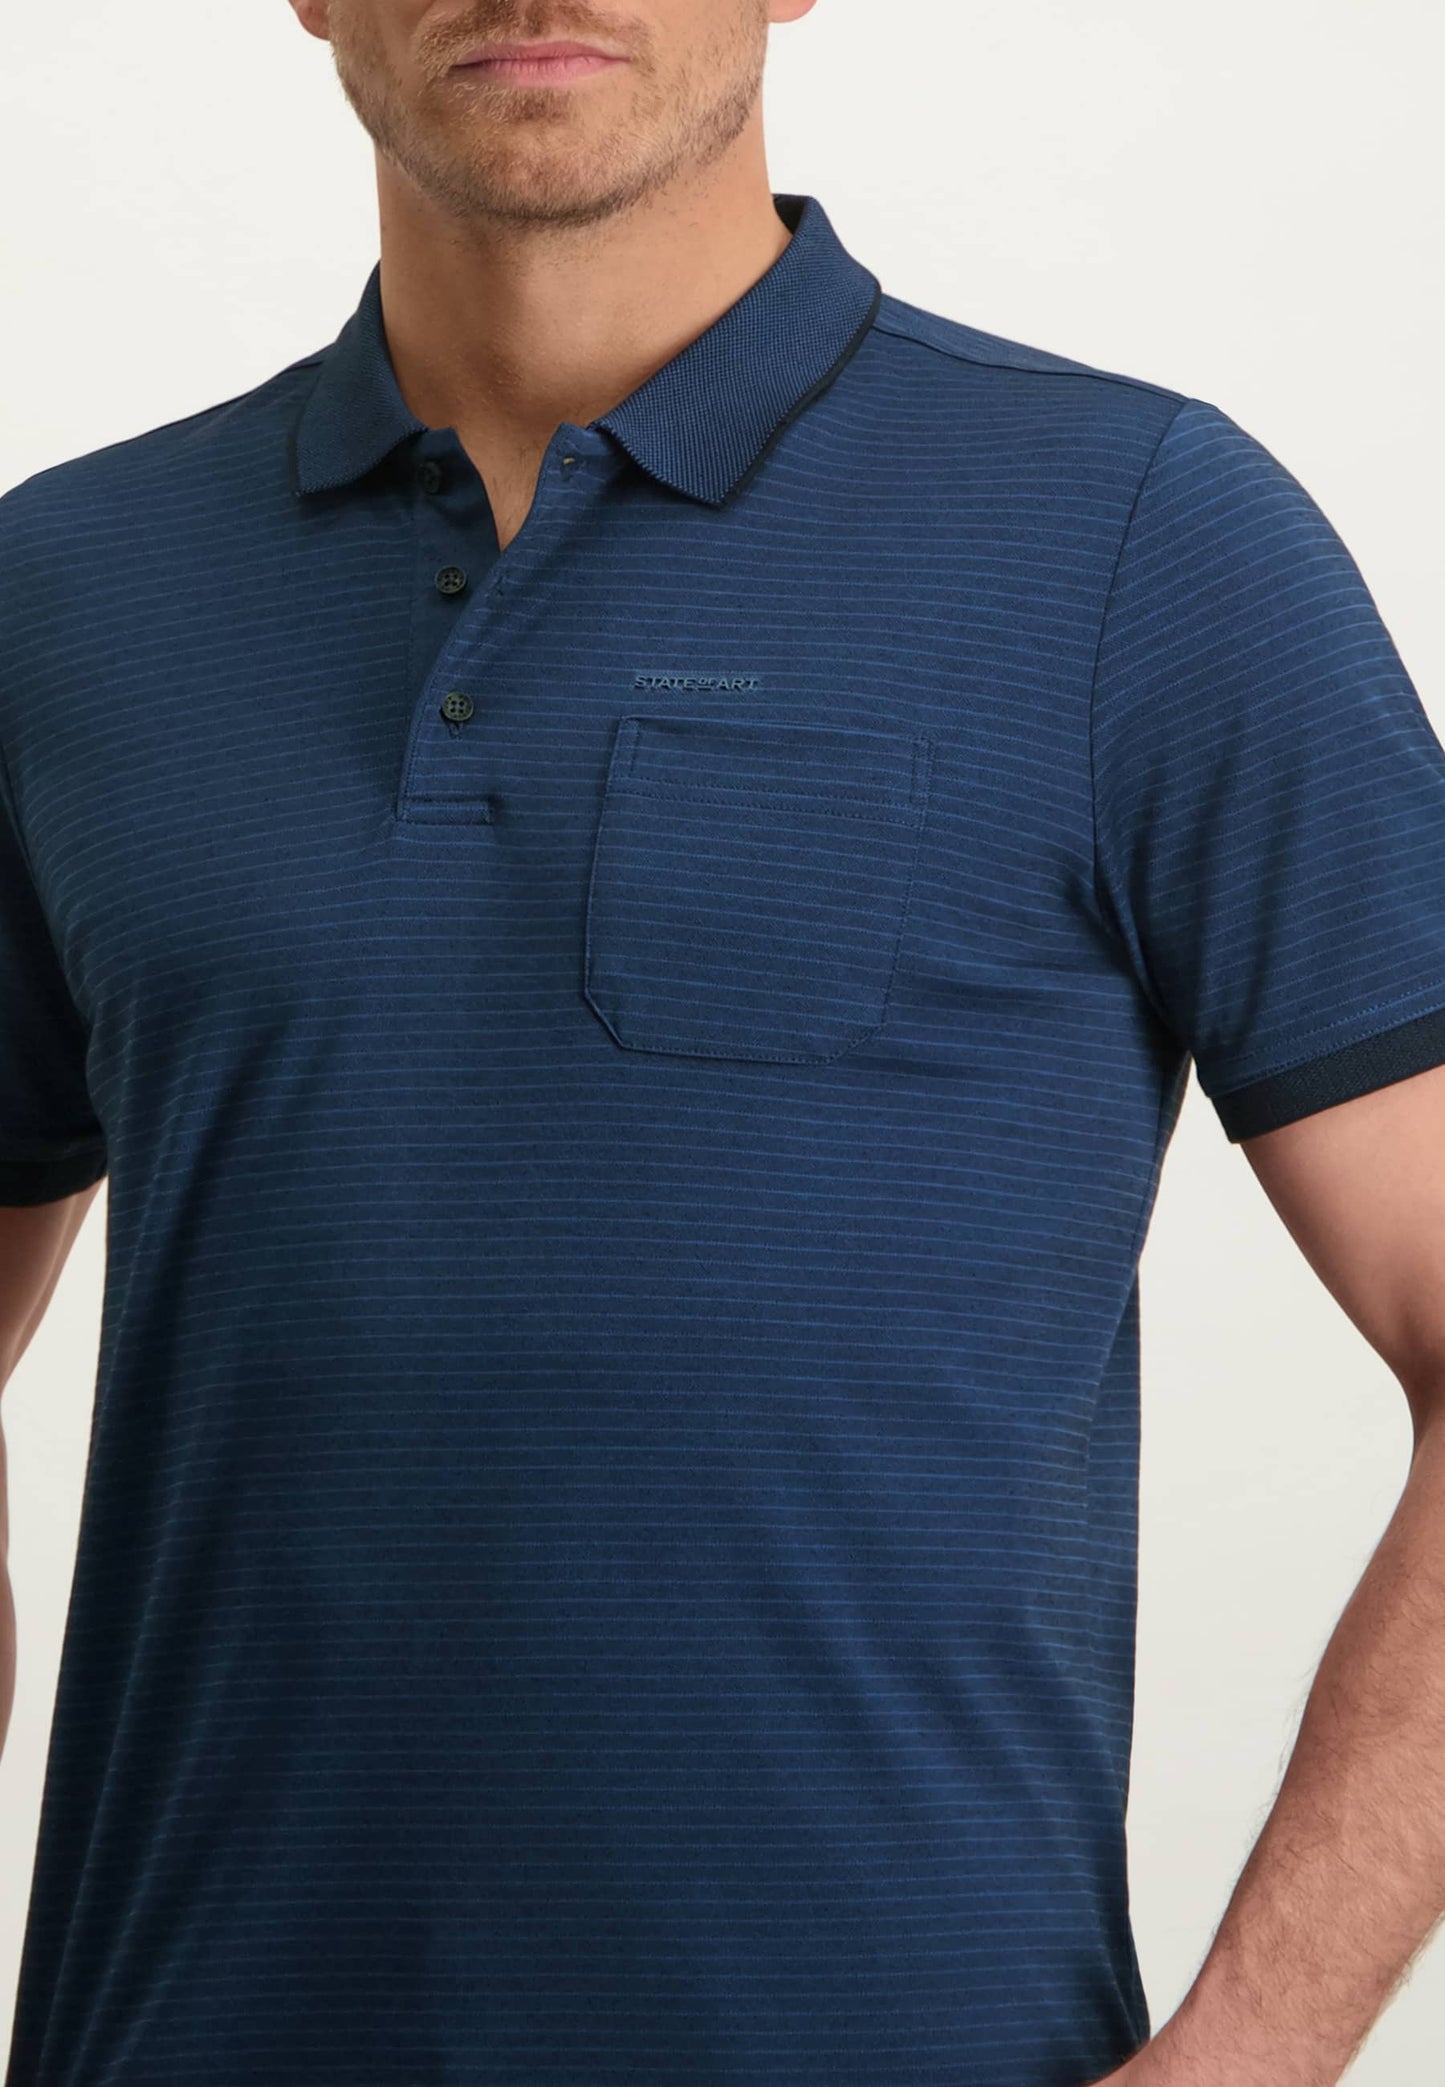 Blue striped polo State of Art - 13446/5957